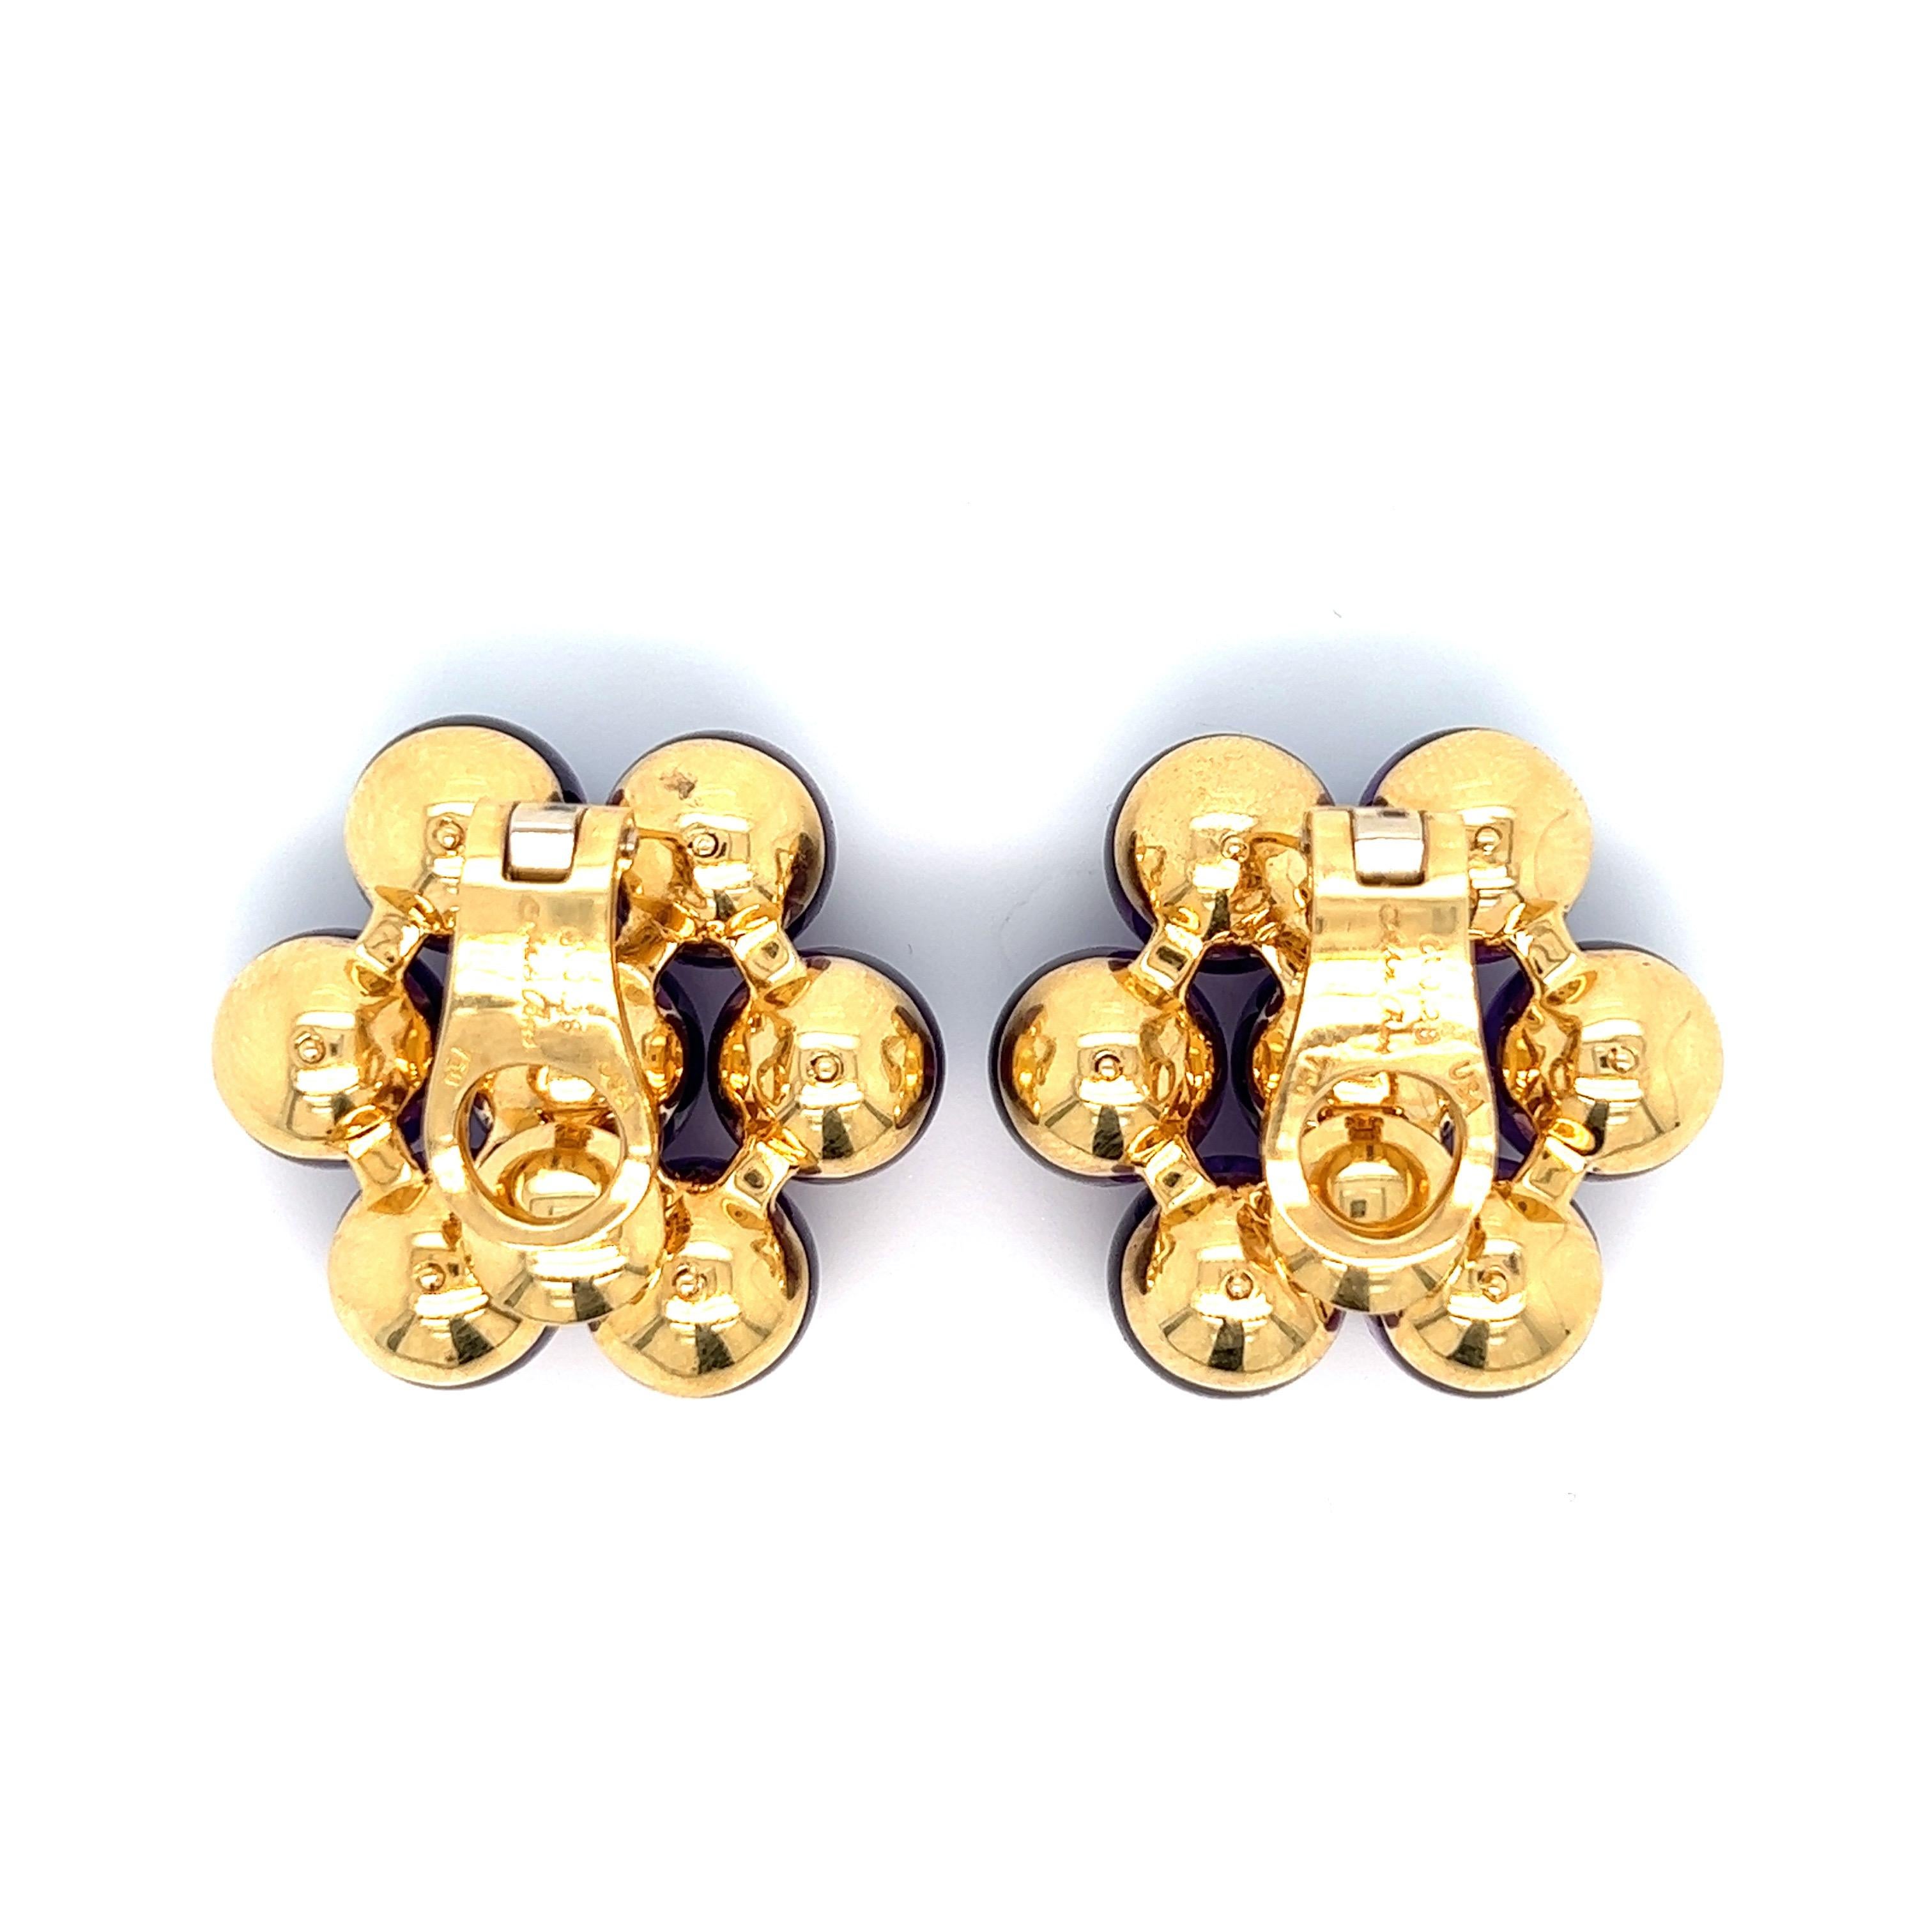 Aletto Brothers 18 karat yellow gold ear clips with seven amethyst spheres each. At the top of each sphere is a small diamond weighing approximately 0.28 carat. Each sphere is approximately 9 mm in diameter. Marked: Aletto Bros. / 750 / Ct 0.28. 